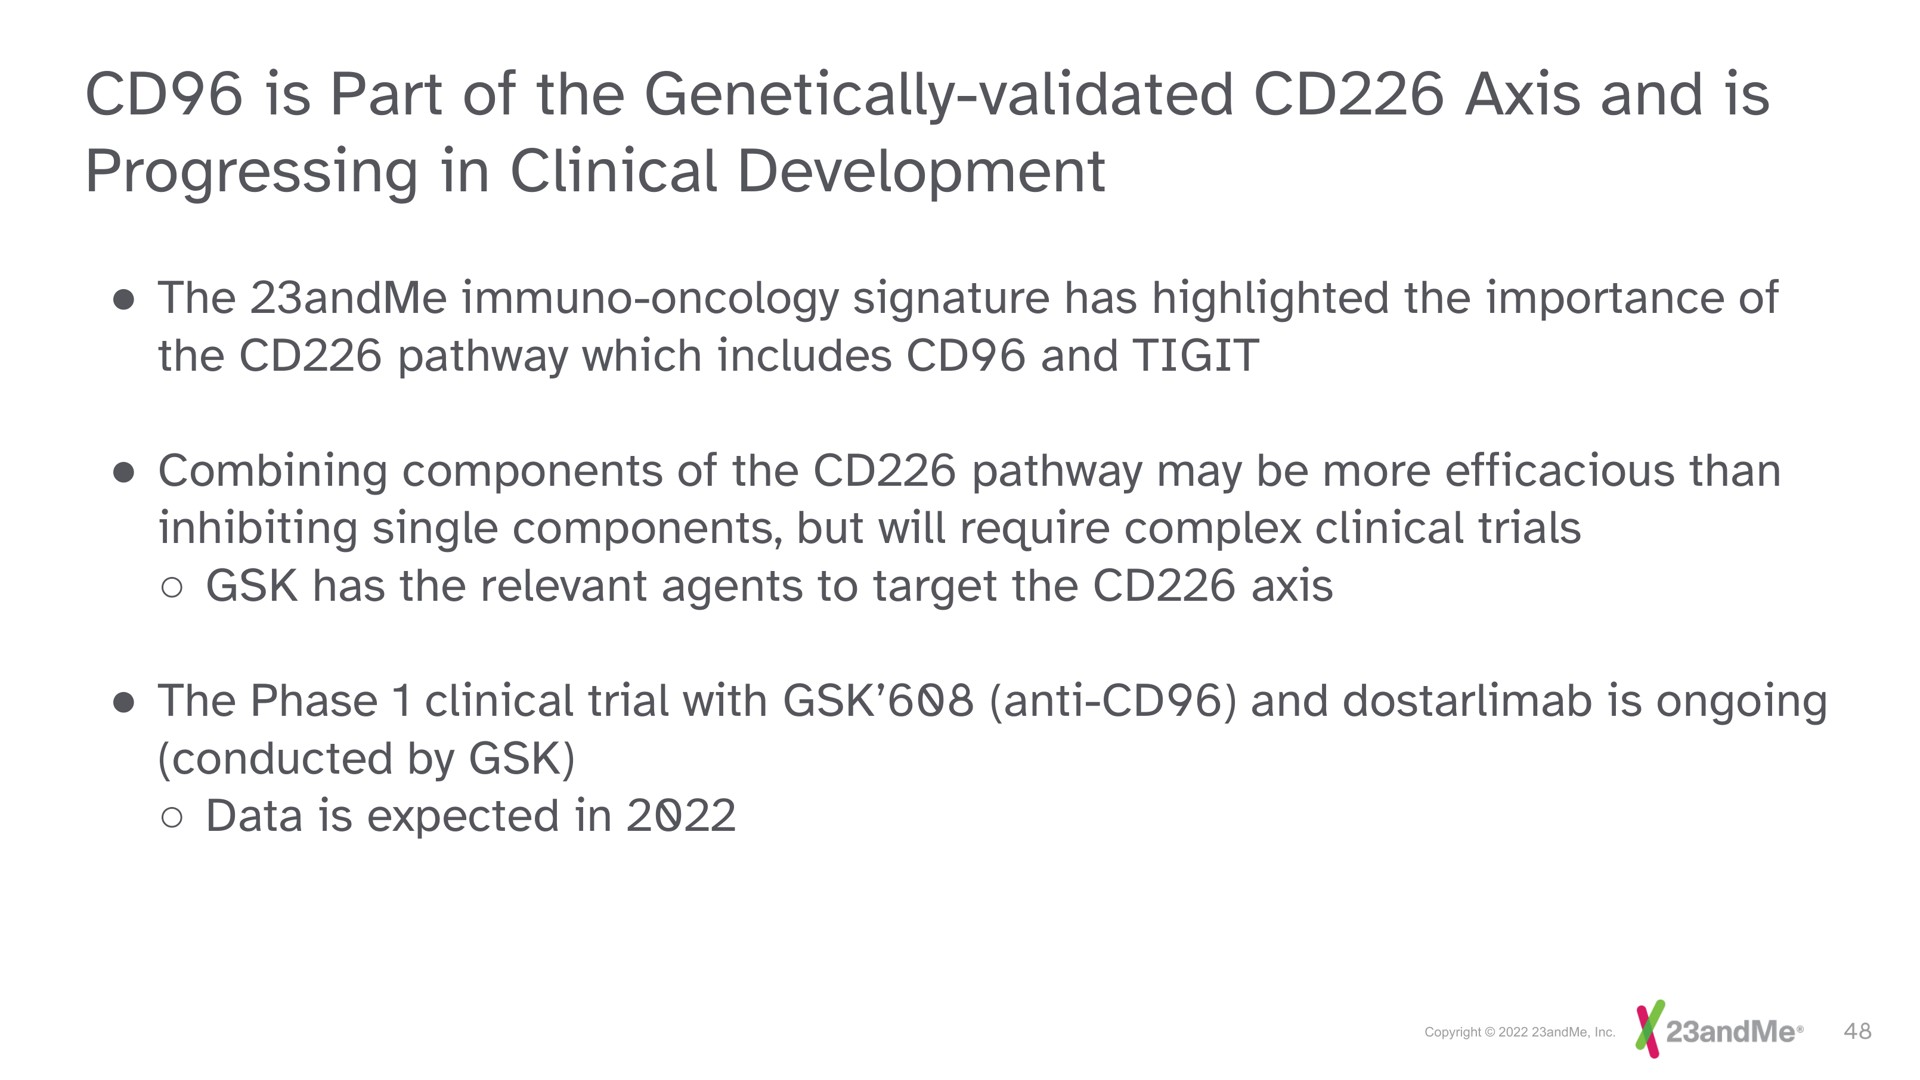 is part of the genetically validated axis and is progressing in clinical development | 23andMe